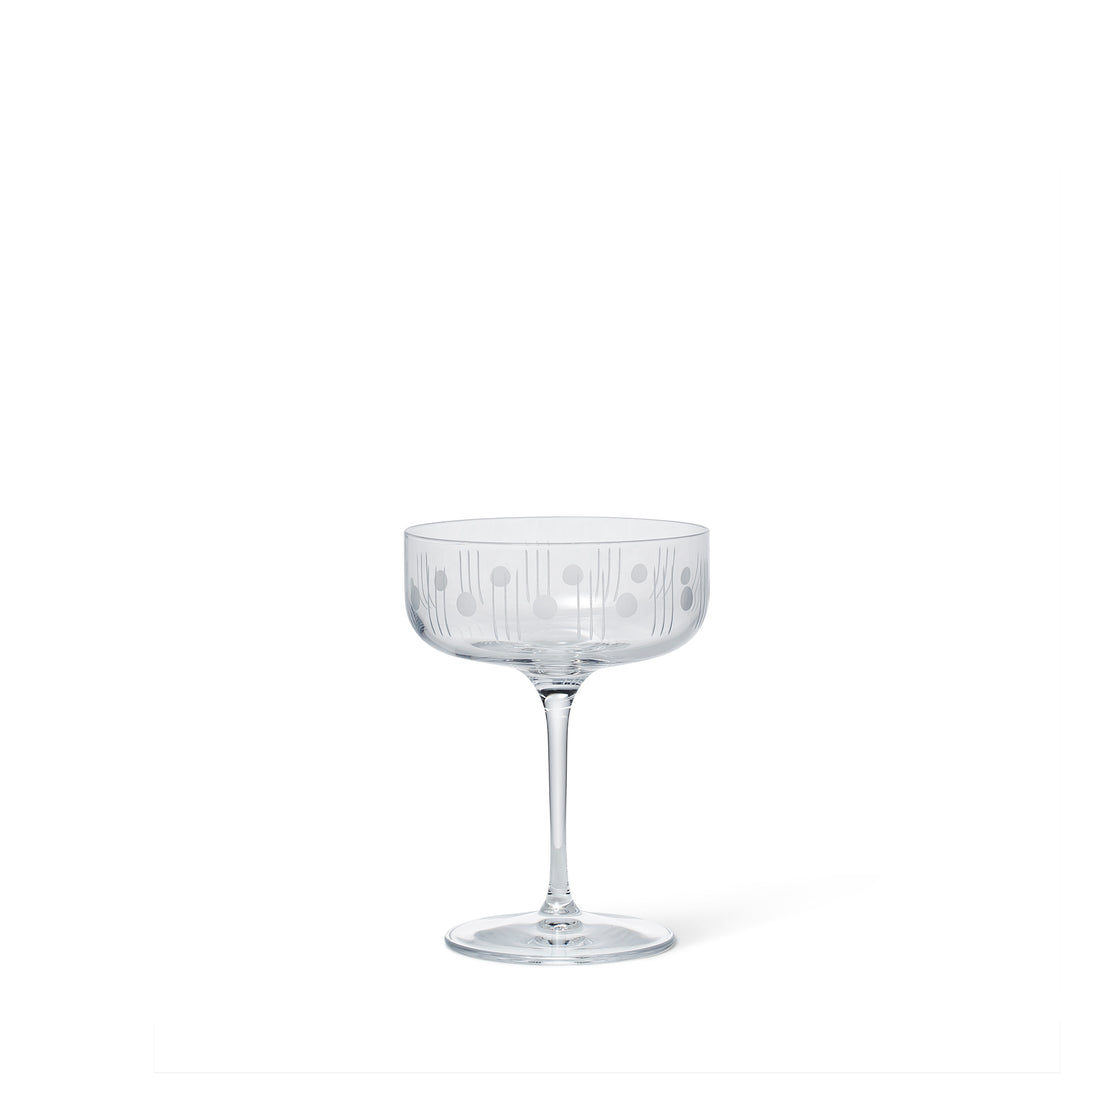 Rolf - Nick & Nora Mid Century Modern Coupe 10.25oz - Boisson — Brooklyn's Non-Alcoholic Spirits, Beer, Wine, and Home Bar Shop in Cobble Hill